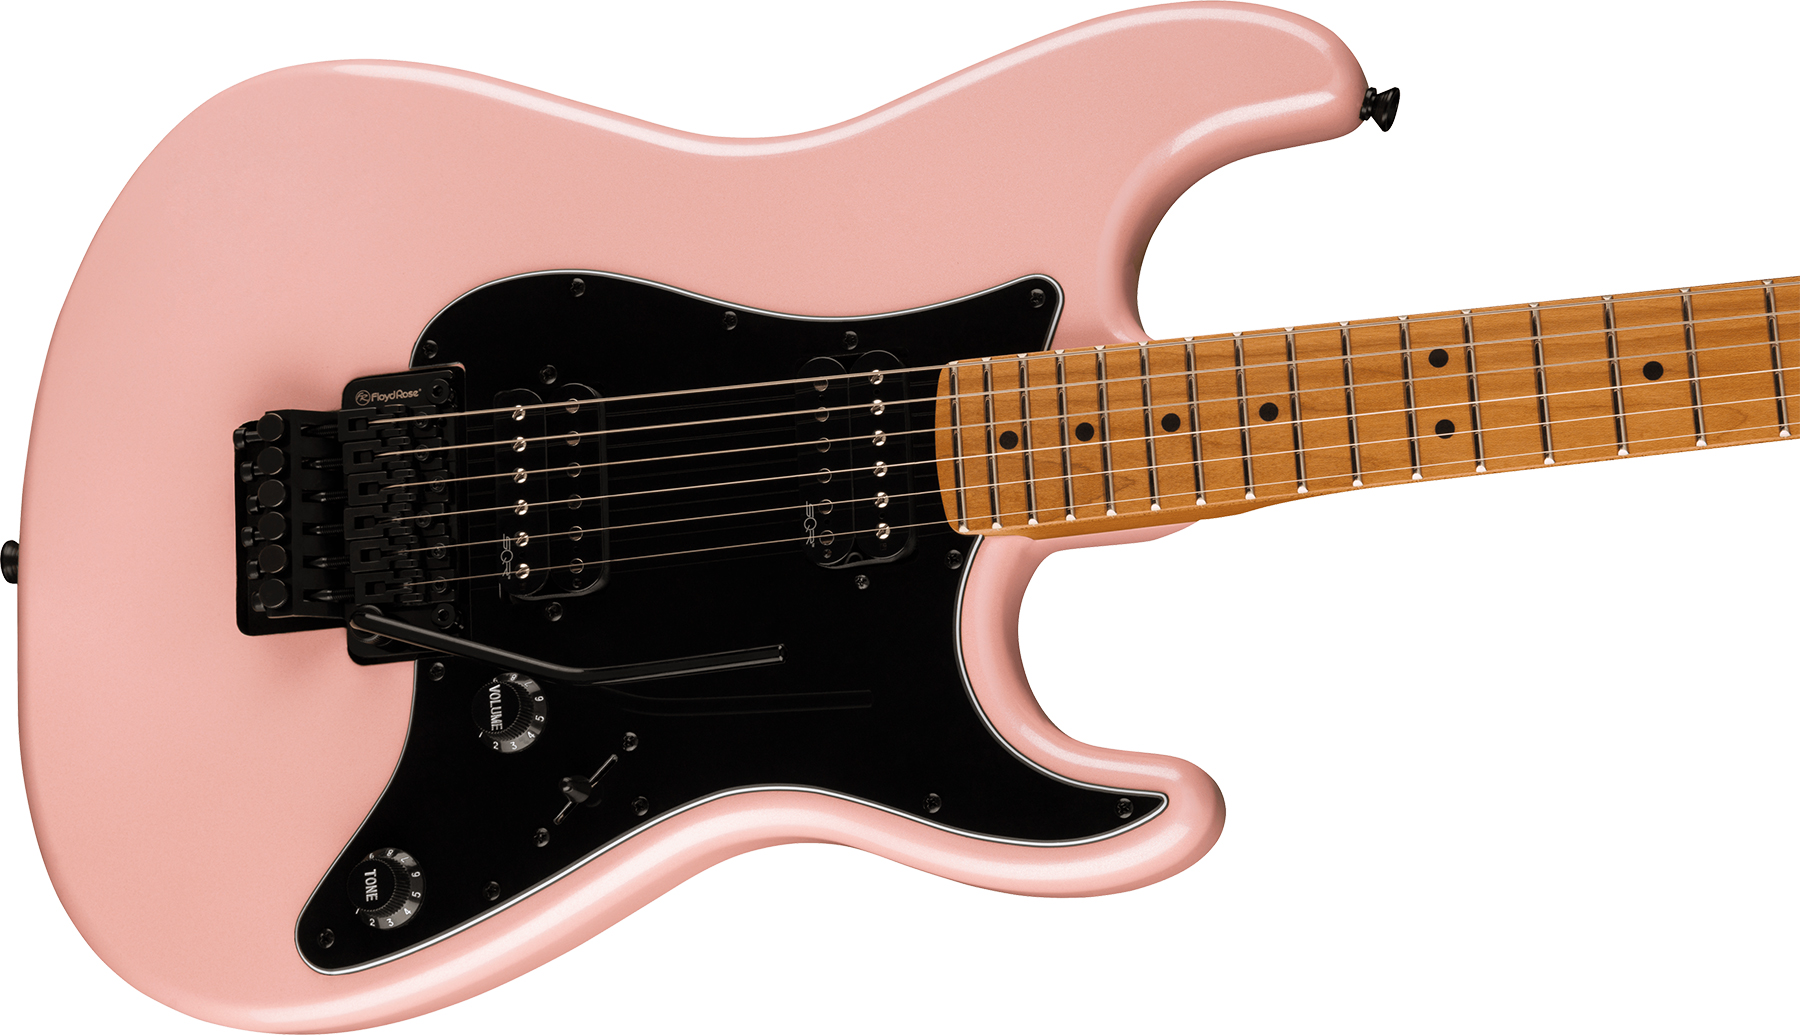 Squier Strat Contemporary Hh Fr Mn - Shell Pink Pearl - E-Gitarre in Str-Form - Variation 2